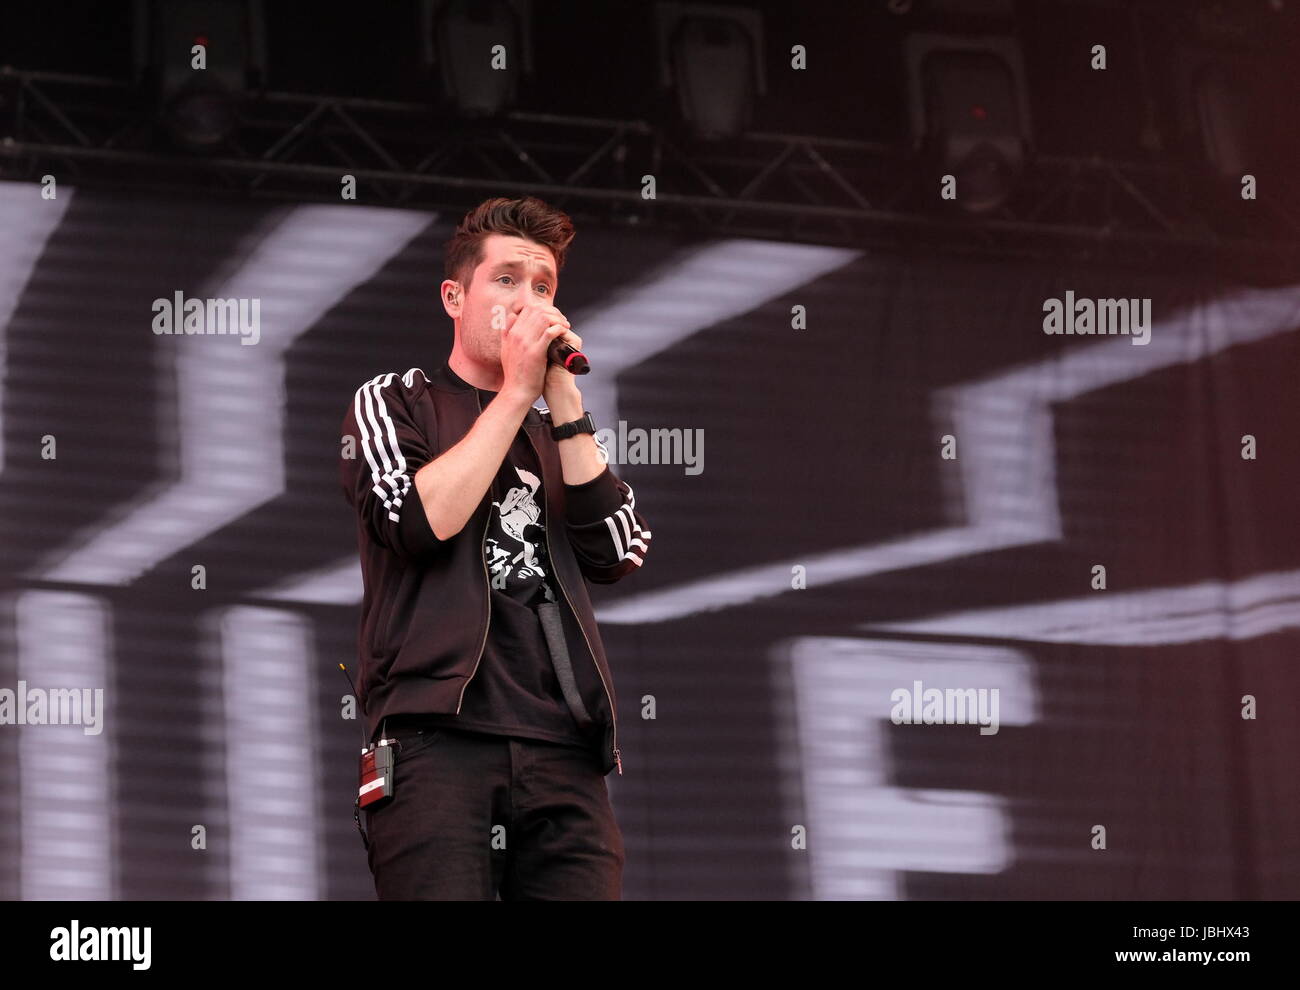 Newport, Isle of Wight, UK. 11th June, 2017. Isle of Wight Festival Day 4 - British group Bastille performing at IOW Festival, Seaclose Park Newport 11th June 2017, UK Credit: DFP Photographic/Alamy Live News Stock Photo